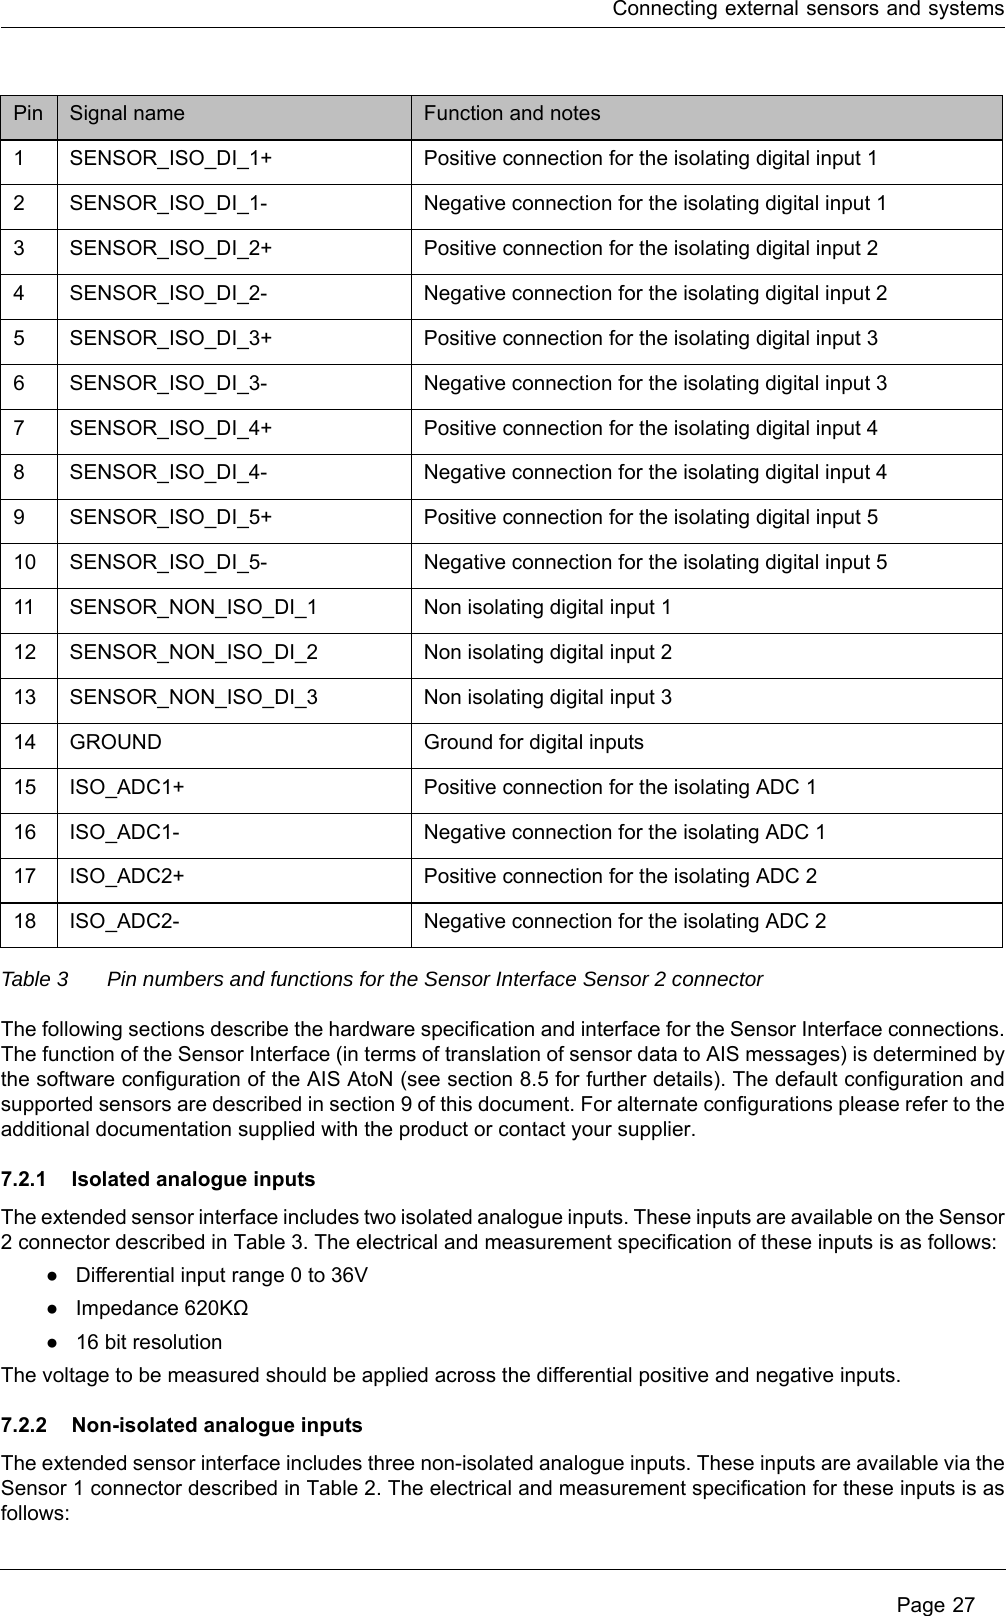 Connecting external sensors and systems Page 27Table 3 Pin numbers and functions for the Sensor Interface Sensor 2 connectorThe following sections describe the hardware specification and interface for the Sensor Interface connections. The function of the Sensor Interface (in terms of translation of sensor data to AIS messages) is determined by the software configuration of the AIS AtoN (see section 8.5 for further details). The default configuration and supported sensors are described in section 9 of this document. For alternate configurations please refer to the additional documentation supplied with the product or contact your supplier.7.2.1 Isolated analogue inputsThe extended sensor interface includes two isolated analogue inputs. These inputs are available on the Sensor 2 connector described in Table 3. The electrical and measurement specification of these inputs is as follows: ●Differential input range 0 to 36V●Impedance 620KΩ●16 bit resolutionThe voltage to be measured should be applied across the differential positive and negative inputs.7.2.2 Non-isolated analogue inputsThe extended sensor interface includes three non-isolated analogue inputs. These inputs are available via the Sensor 1 connector described in Table 2. The electrical and measurement specification for these inputs is as follows:Pin Signal name Function and notes1SENSOR_ISO_DI_1+ Positive connection for the isolating digital input 12SENSOR_ISO_DI_1- Negative connection for the isolating digital input 13SENSOR_ISO_DI_2+ Positive connection for the isolating digital input 24SENSOR_ISO_DI_2- Negative connection for the isolating digital input 25SENSOR_ISO_DI_3+ Positive connection for the isolating digital input 36SENSOR_ISO_DI_3- Negative connection for the isolating digital input 37SENSOR_ISO_DI_4+ Positive connection for the isolating digital input 48SENSOR_ISO_DI_4- Negative connection for the isolating digital input 49SENSOR_ISO_DI_5+ Positive connection for the isolating digital input 510 SENSOR_ISO_DI_5- Negative connection for the isolating digital input 511 SENSOR_NON_ISO_DI_1 Non isolating digital input 112 SENSOR_NON_ISO_DI_2 Non isolating digital input 213 SENSOR_NON_ISO_DI_3 Non isolating digital input 314 GROUND Ground for digital inputs15 ISO_ADC1+ Positive connection for the isolating ADC 116 ISO_ADC1- Negative connection for the isolating ADC 117 ISO_ADC2+ Positive connection for the isolating ADC 218 ISO_ADC2- Negative connection for the isolating ADC 2